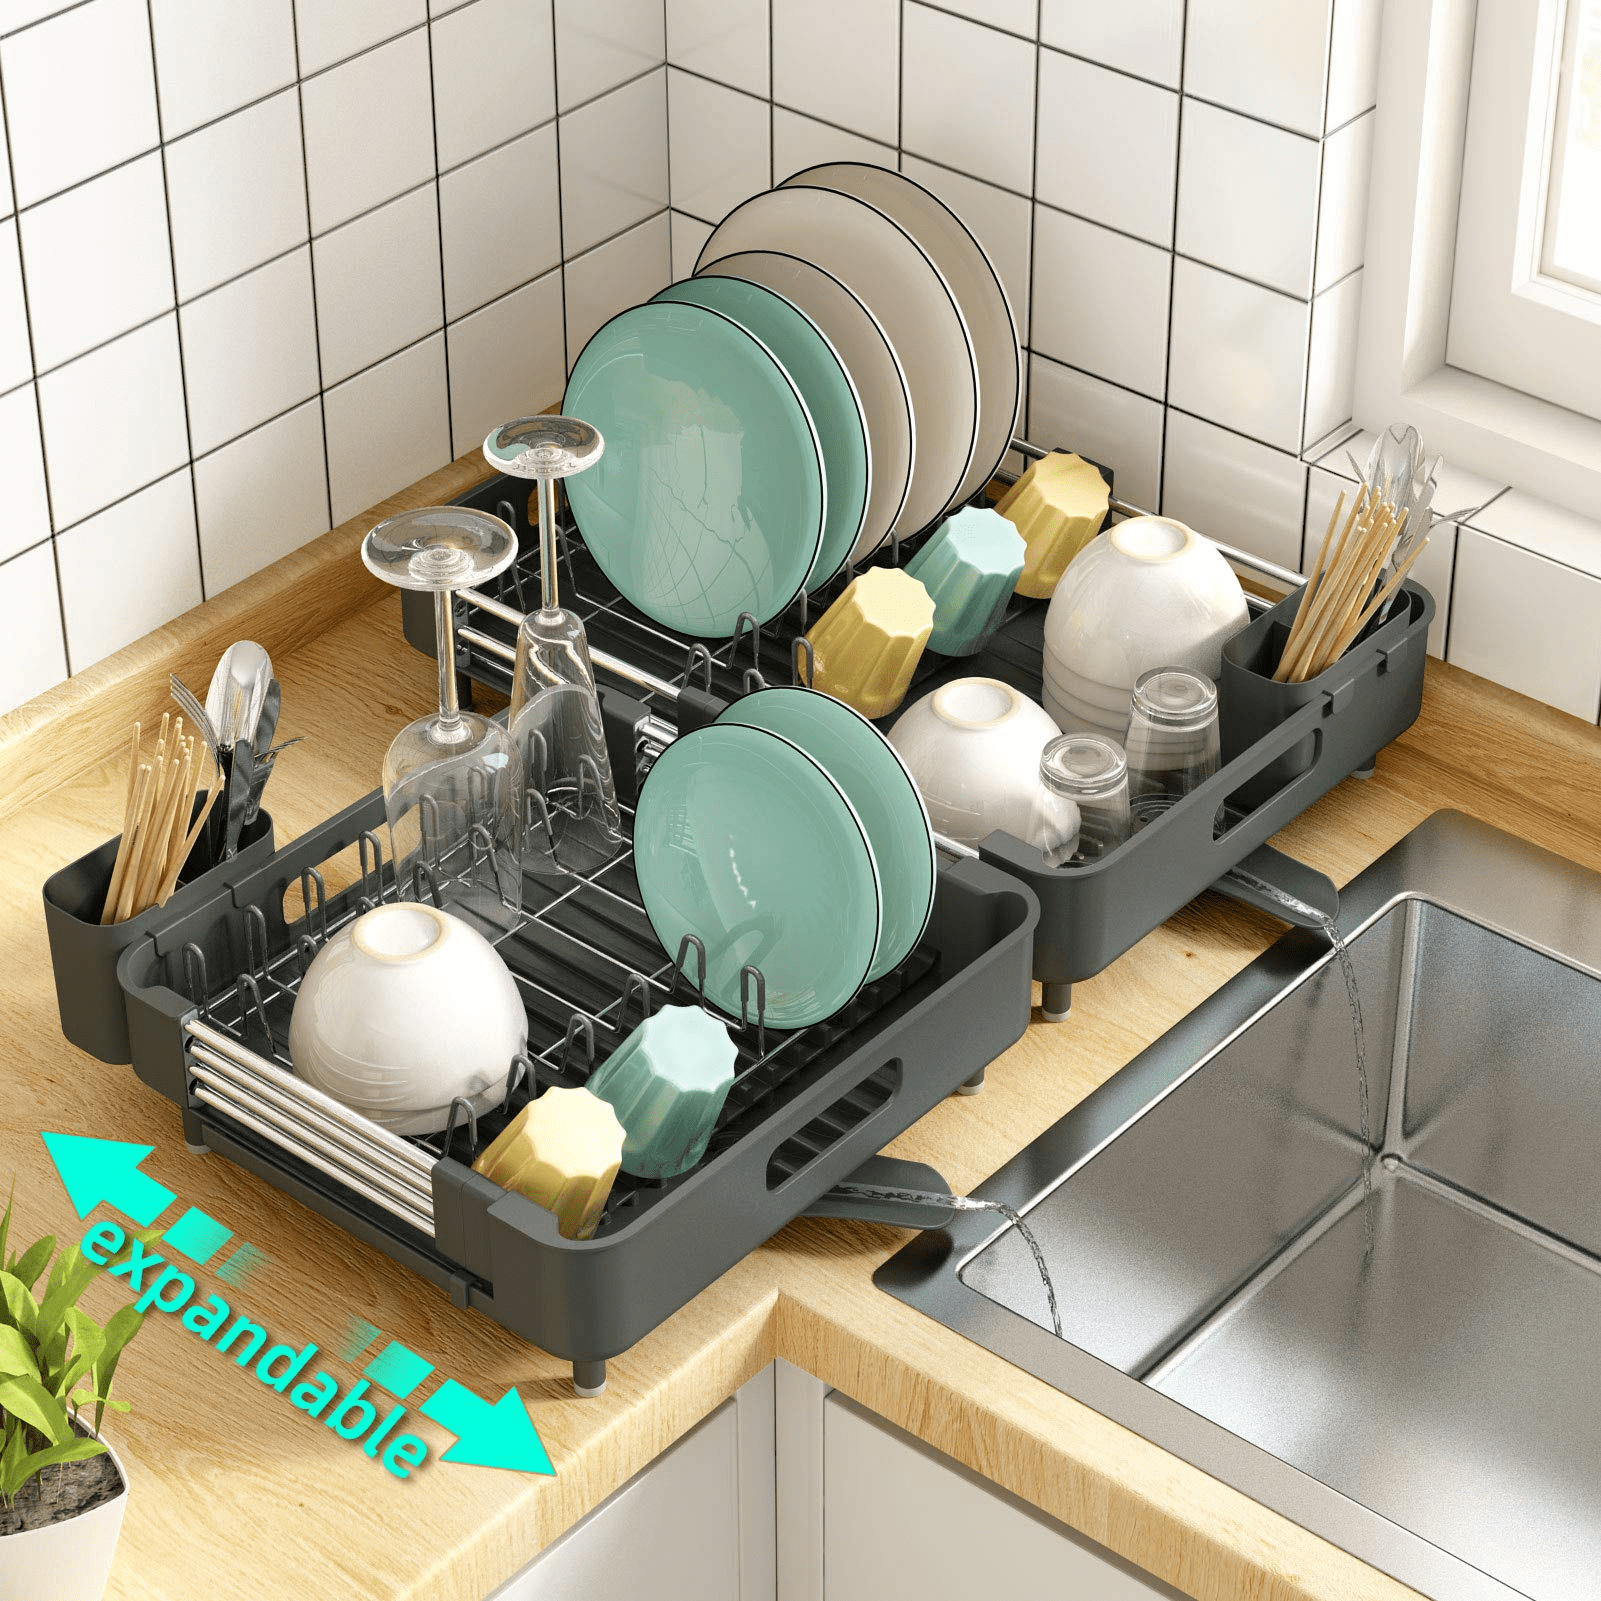 Dish Drying Rack, Dish Rack,Drying Rack Kitchen 304 Stainless Steel Dish  Drainer, with Stretchable Spout for Kitchen Counter15.7 x 12.2 x 9.1 inch